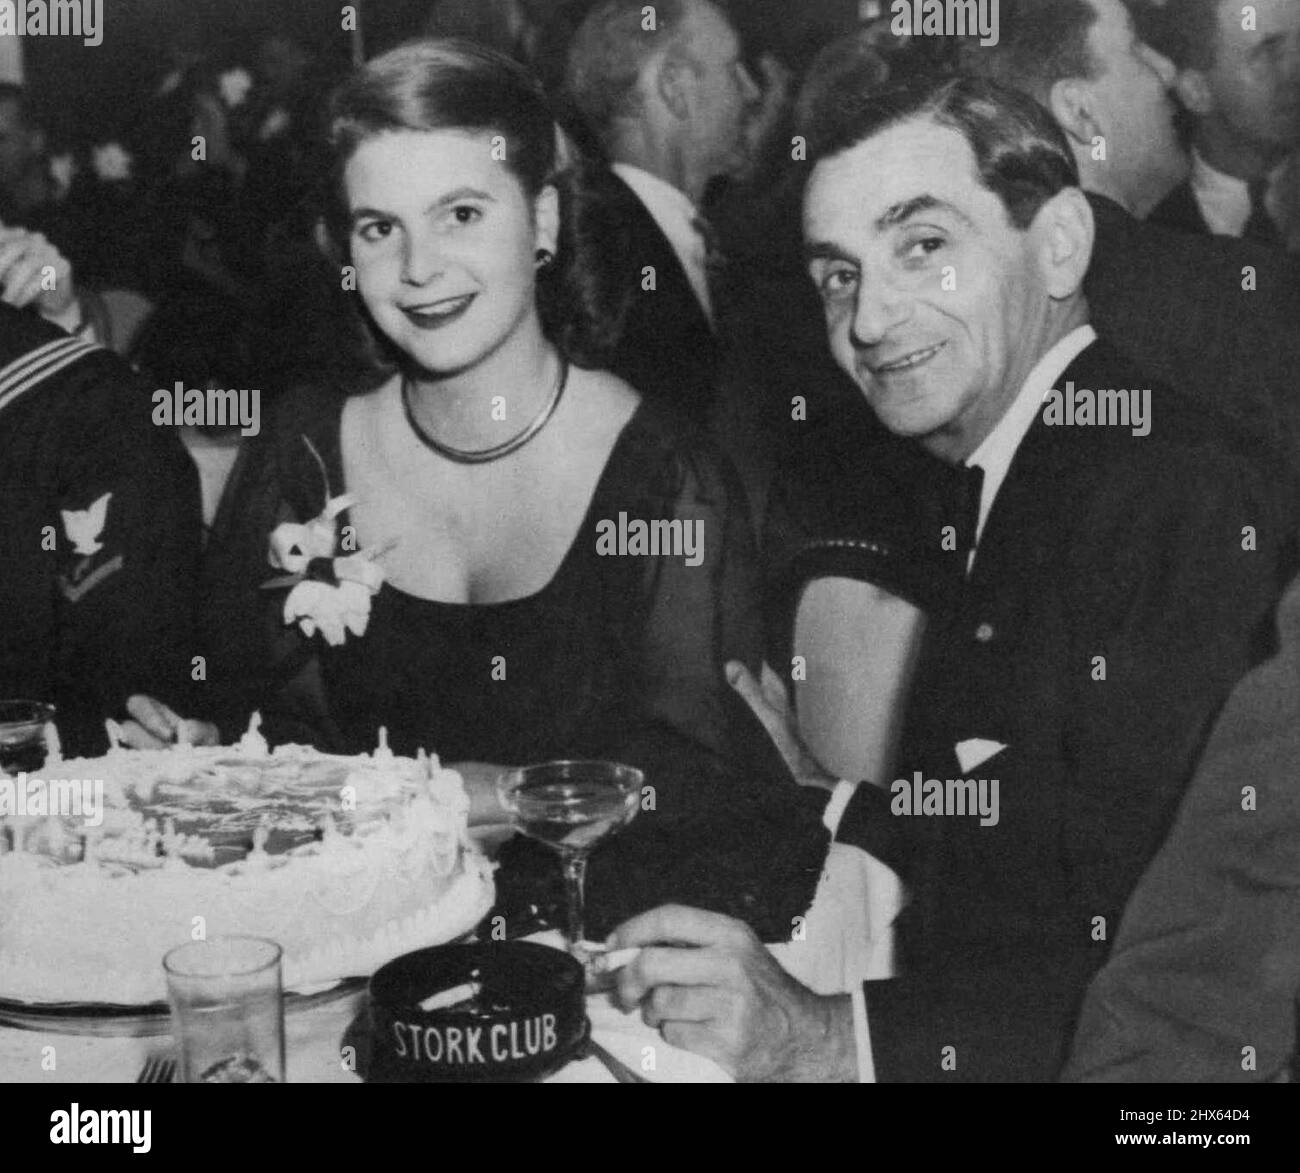 Berlin and Daughter Celebrate. Irving Berlin, Noted Song Writer, and his daughter, Mary Ellis, Share Birthday Cake at the Stork Club in New York, Nov 27, as they celebrate Mary Elli's 19th Birthday Anniversary. November 28, 1945. (Photo by Associated Press Photo) Stock Photo